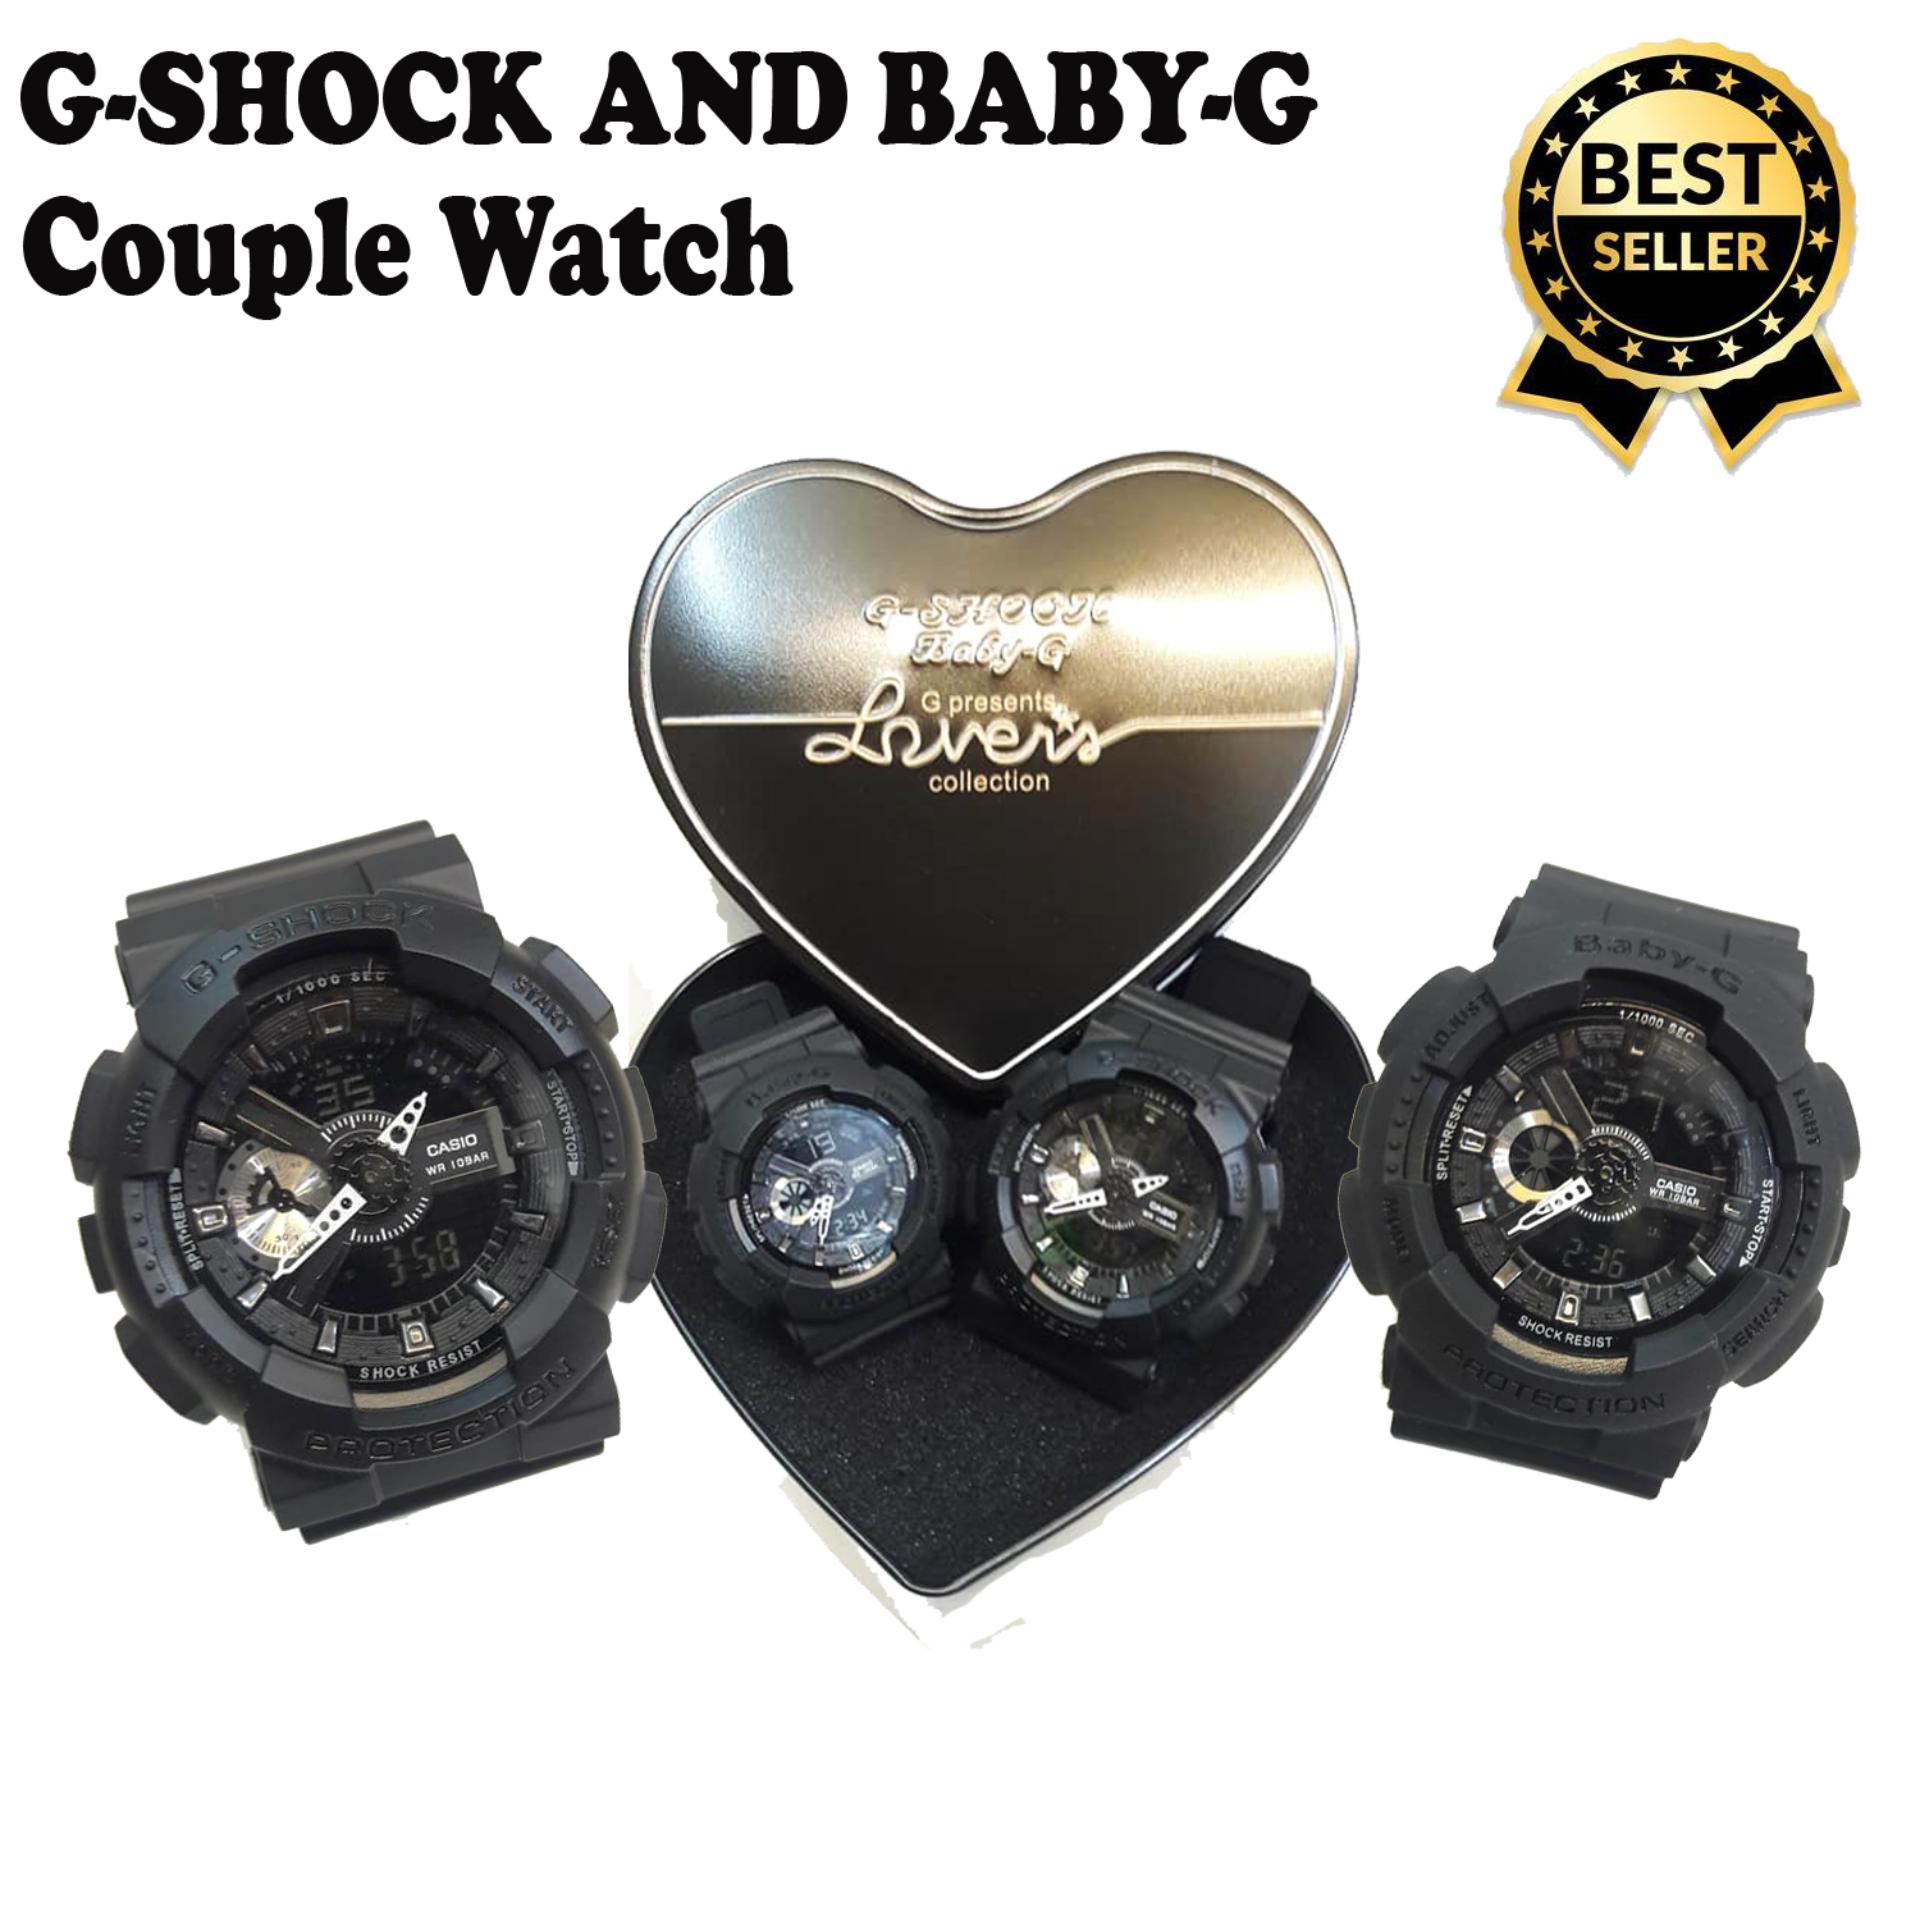 High Quality G Shock And Baby G Couple Watch With Can Grey Black Review And Price